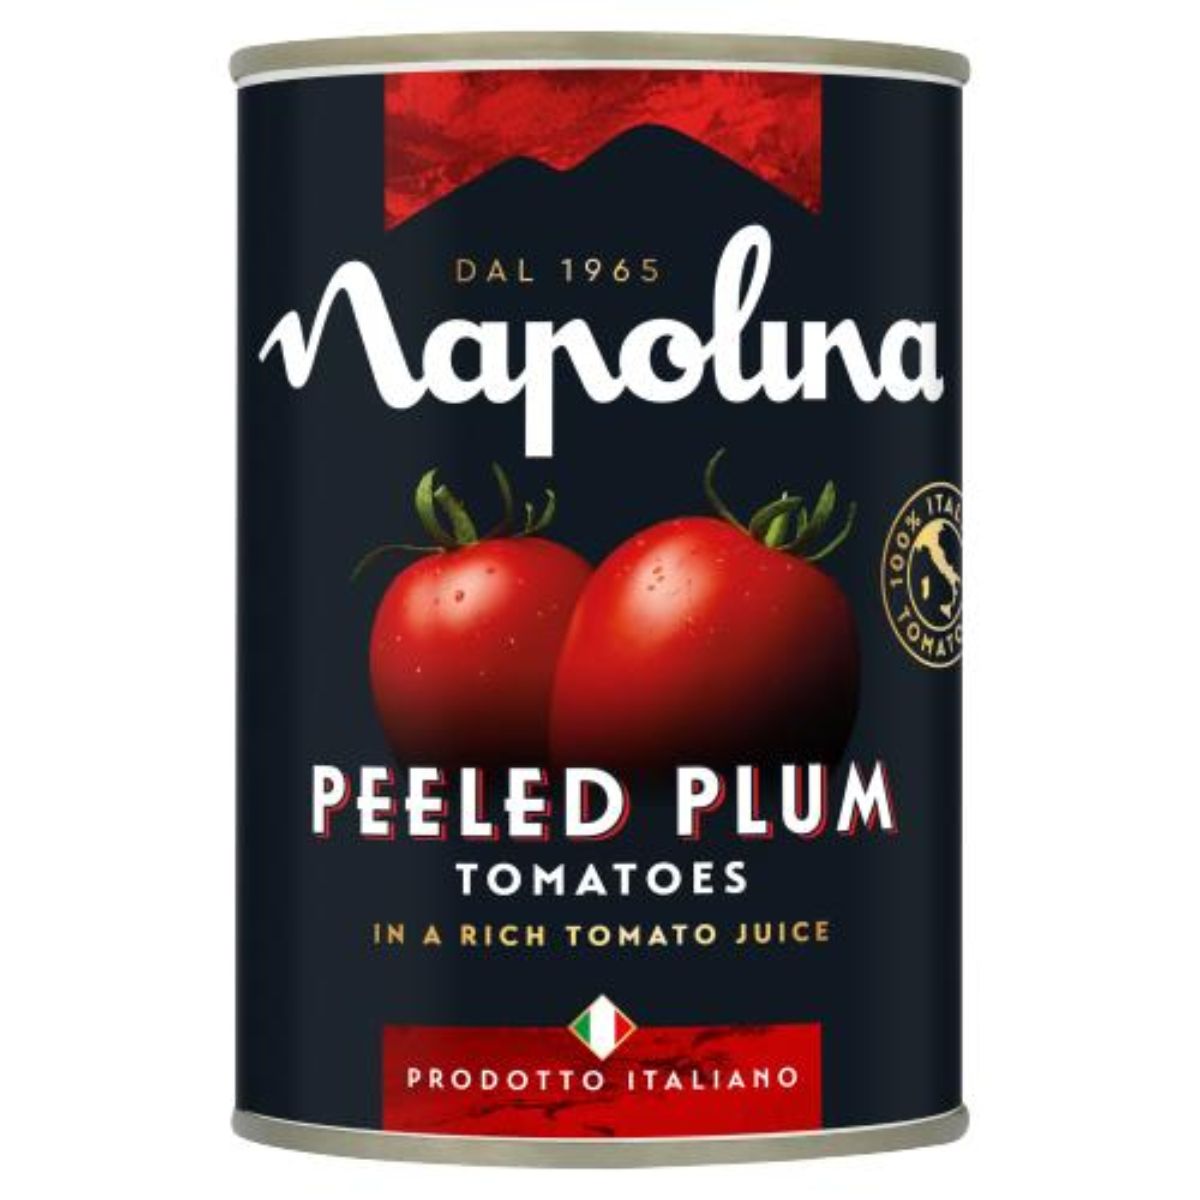 Napolina - Peeled Plum Tomatoes - 400g in a can.